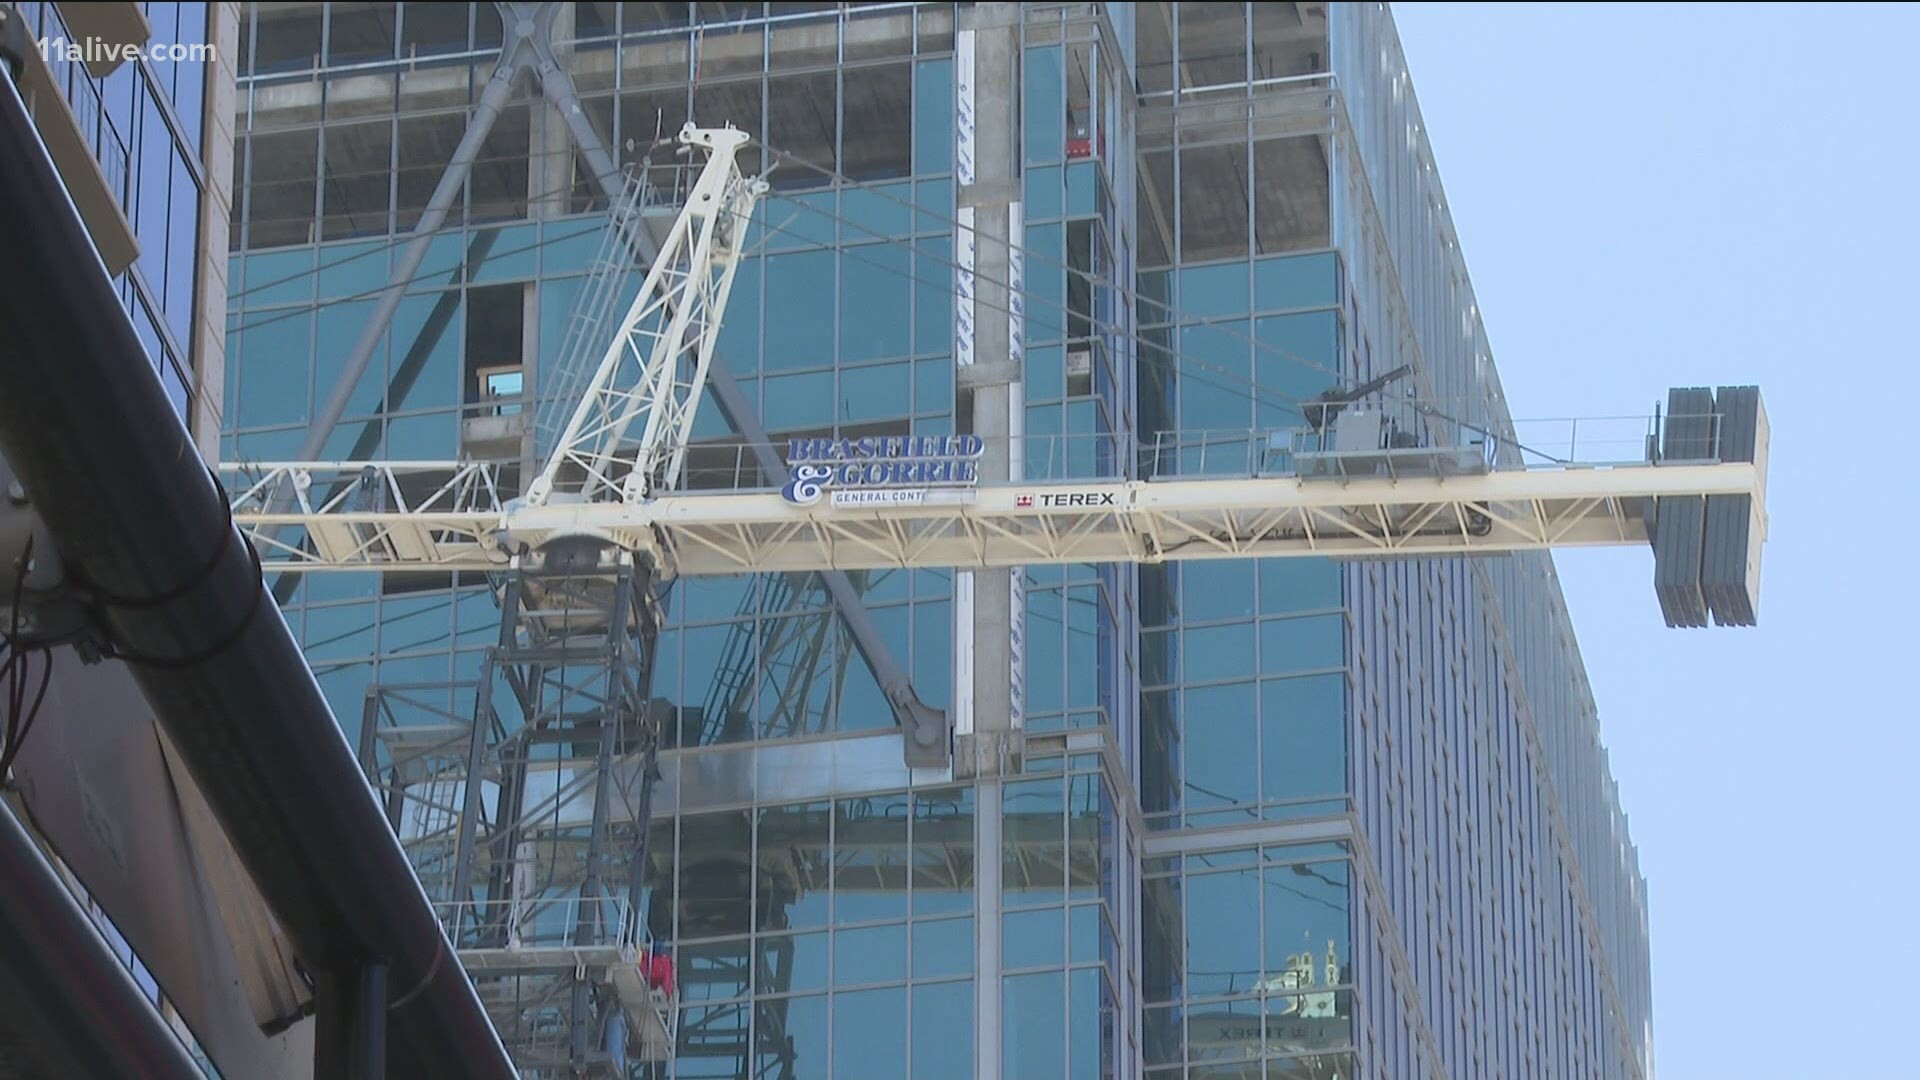 The crane has been leaning up against a building.